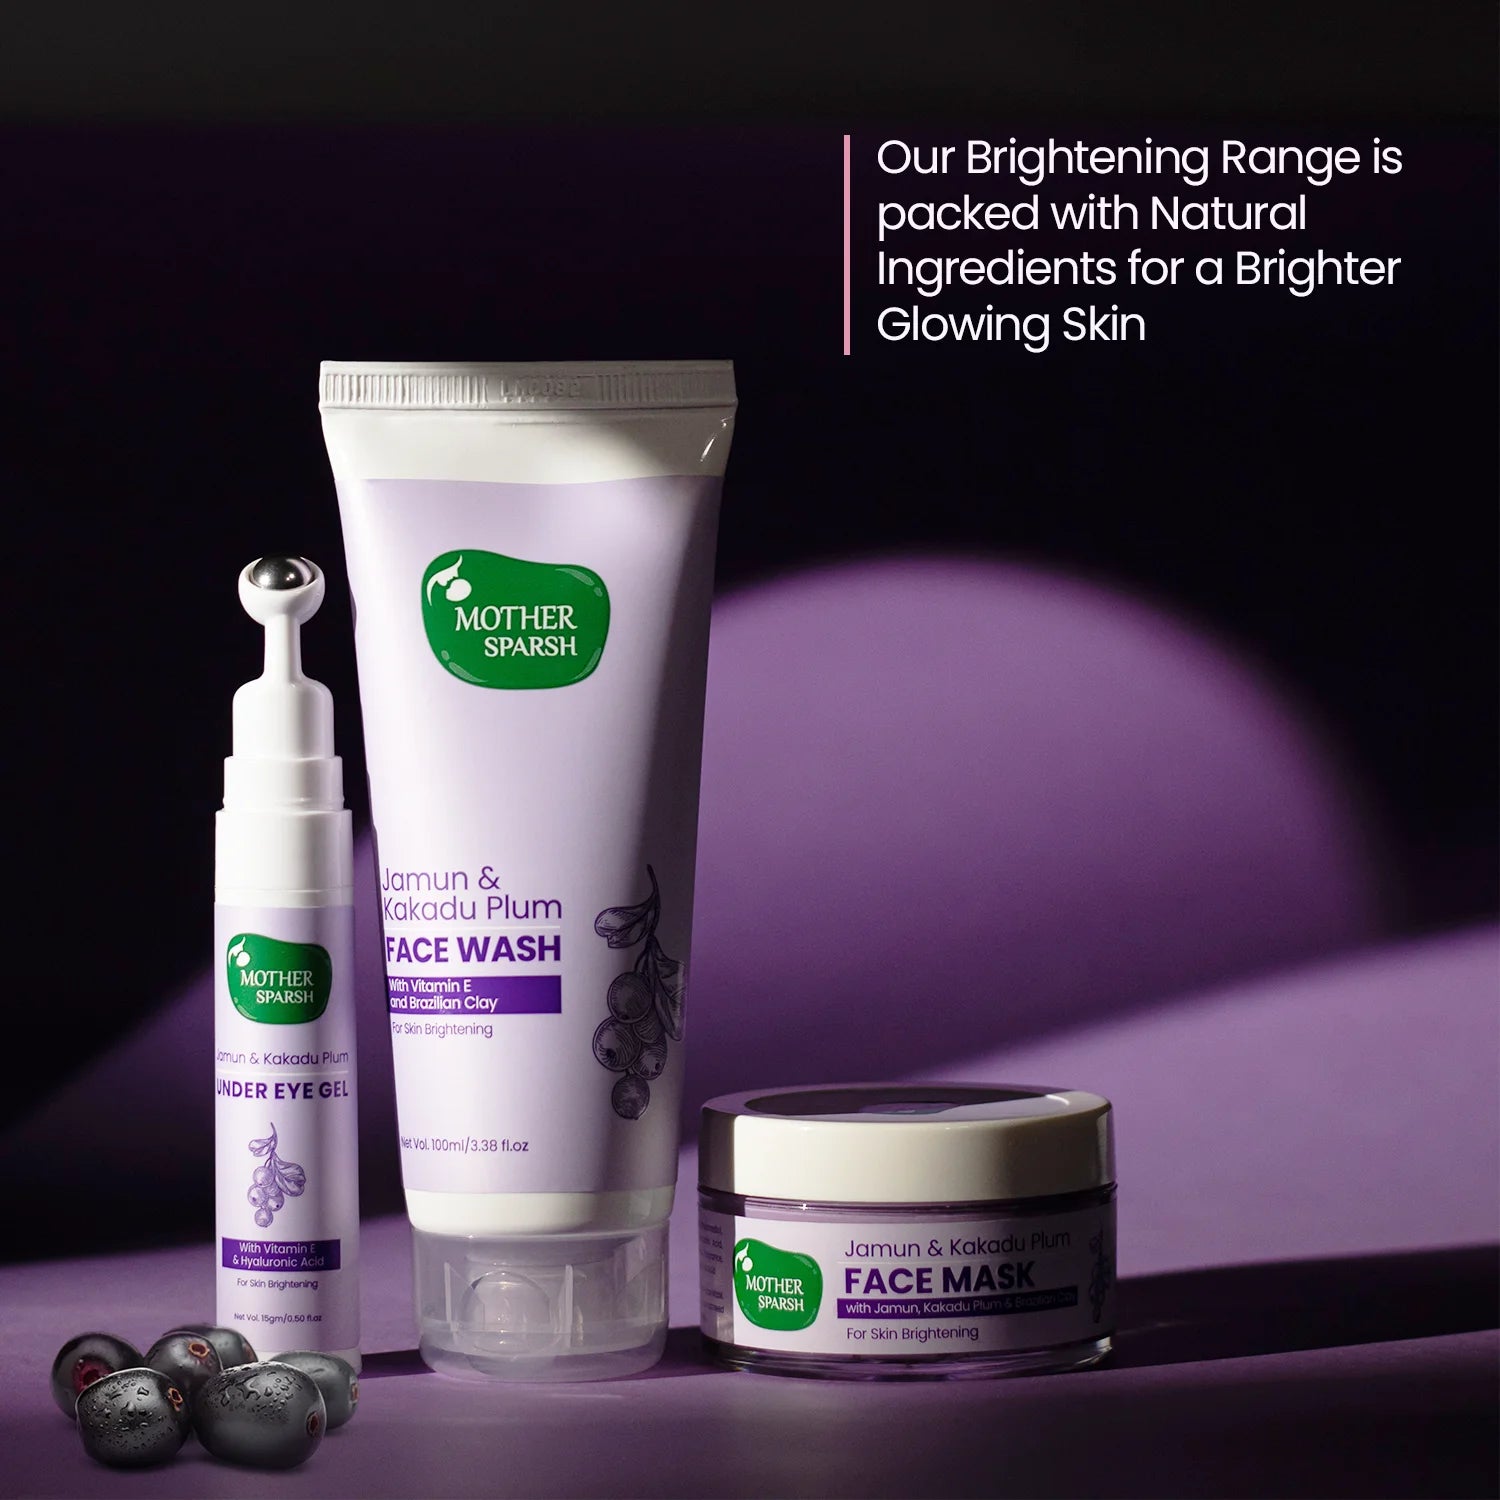 Our Brighter Range is packed with the natural ingredients